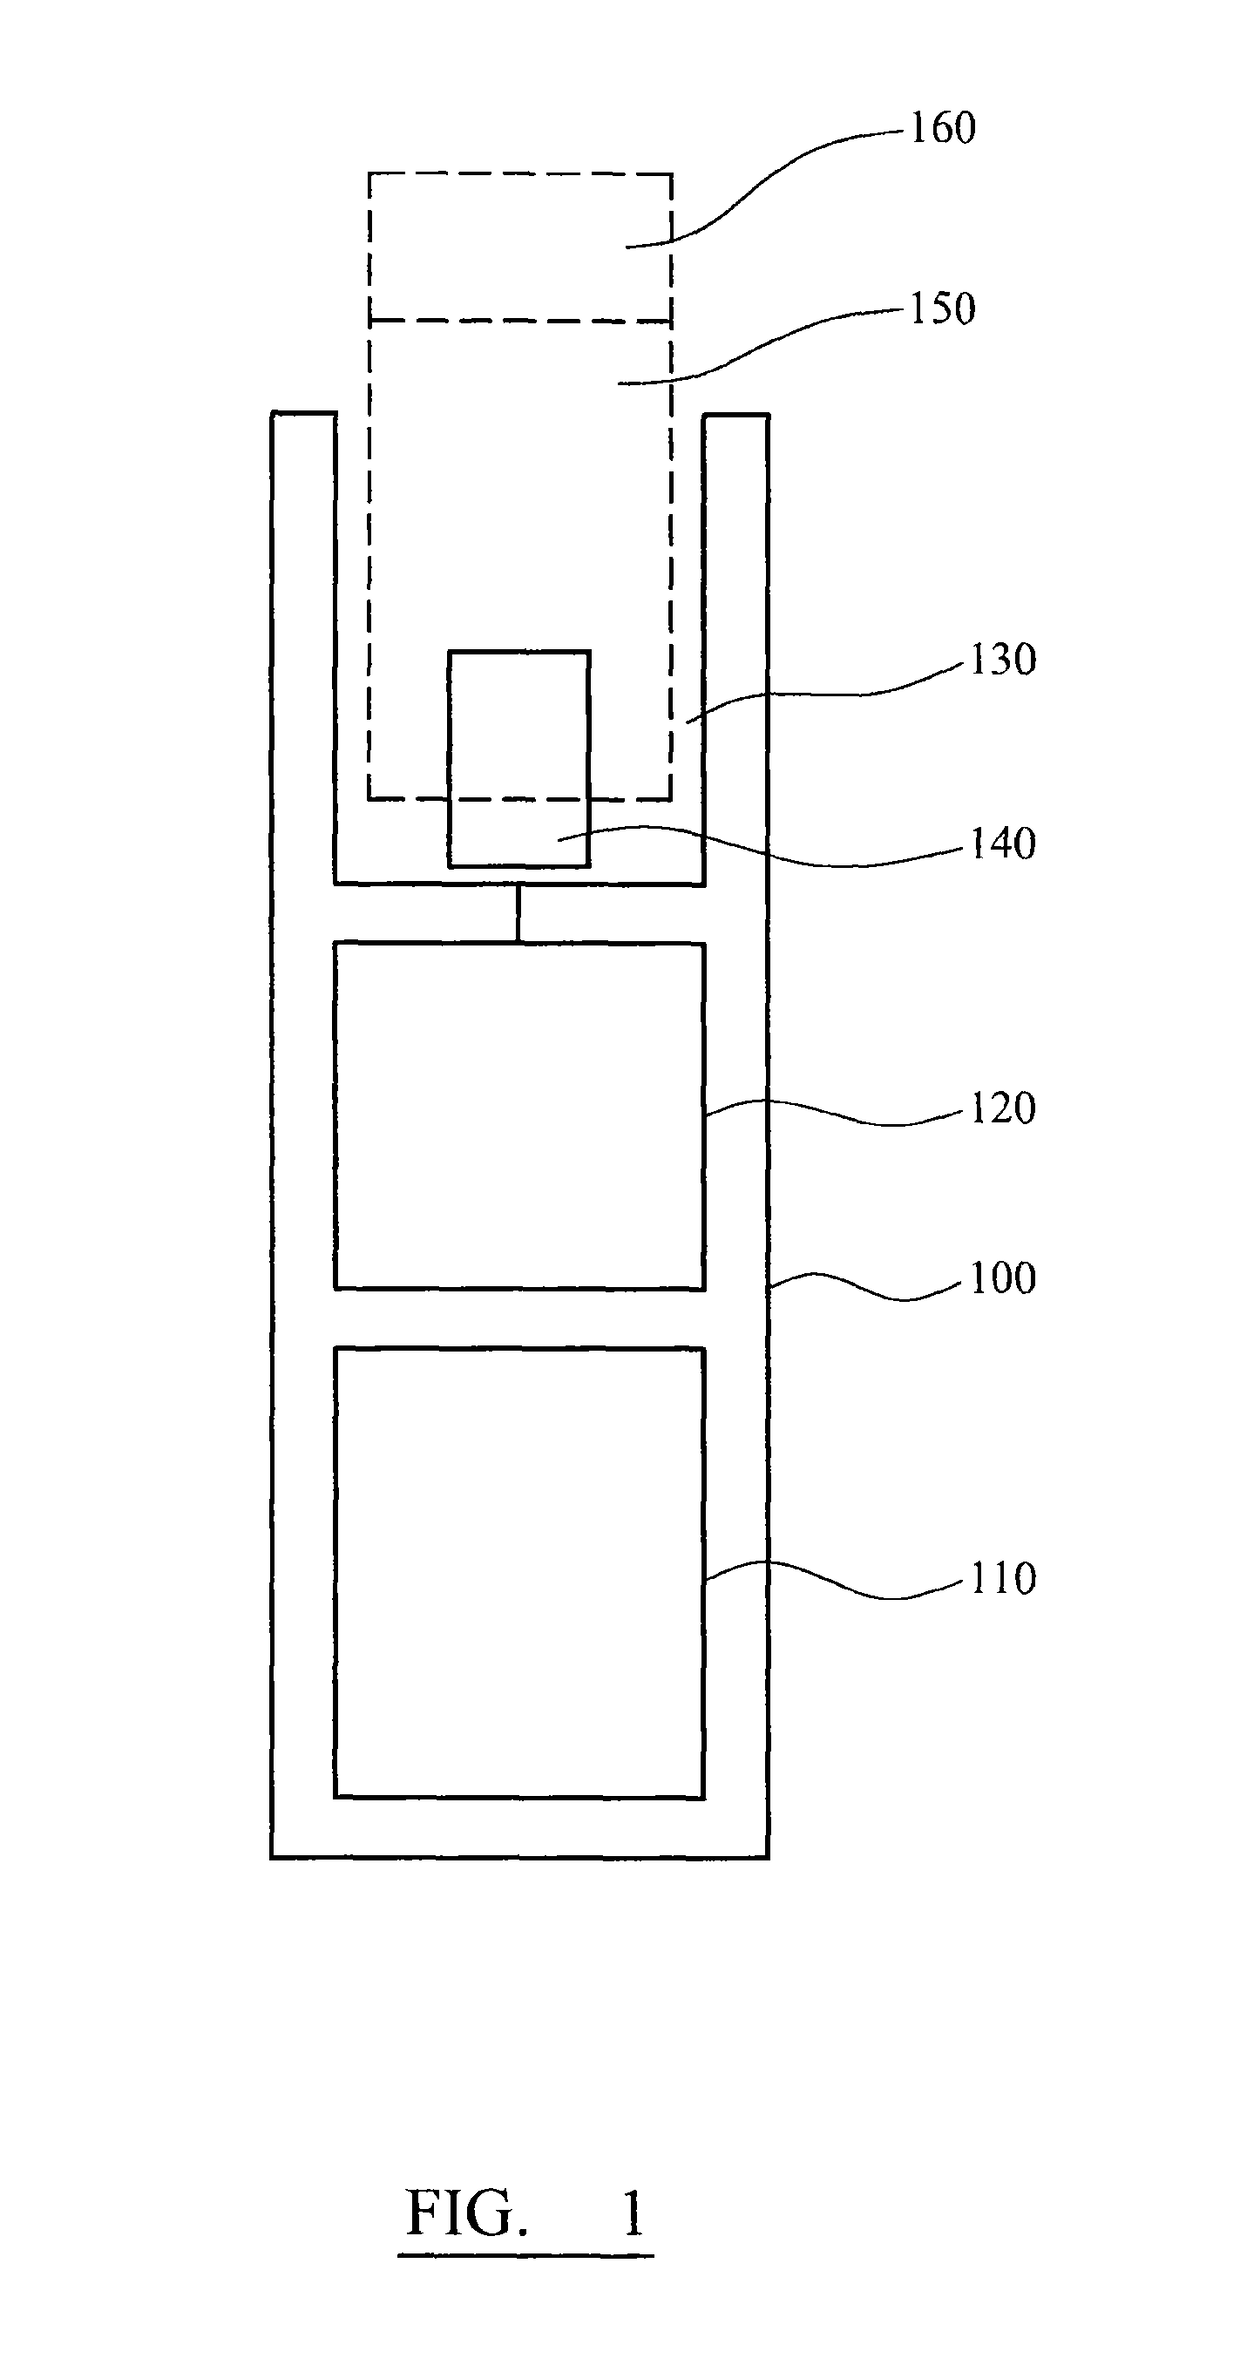 Aerosol generating device with heater assembly